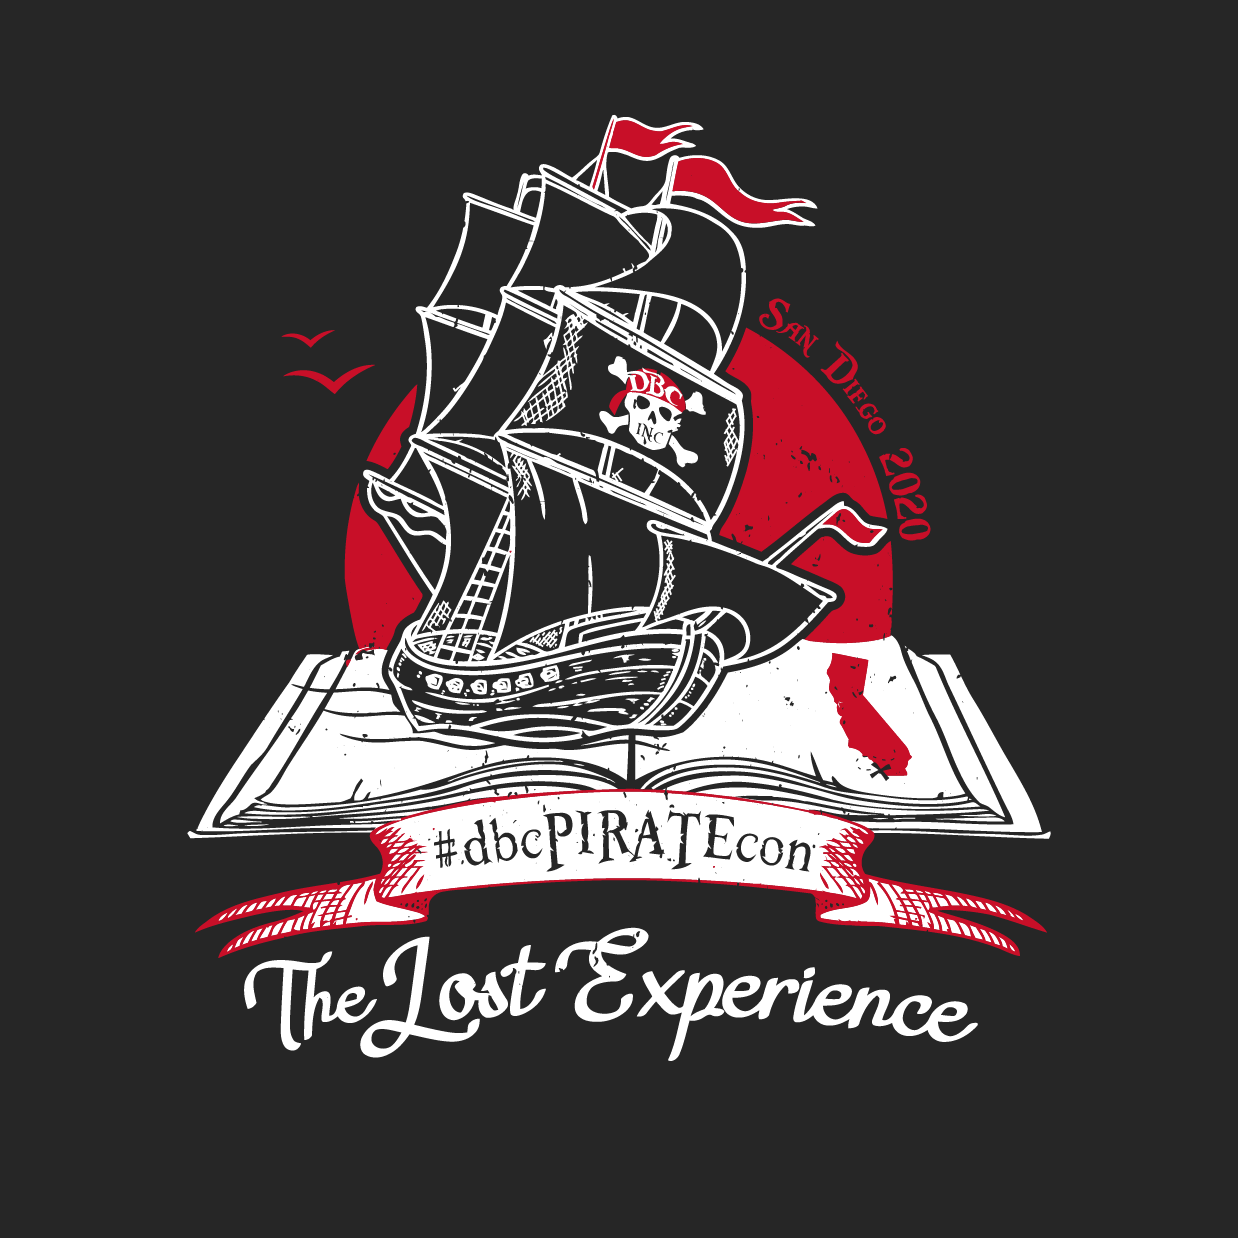 DBC Pirate Con - The Lost Experience shirt design - zoomed